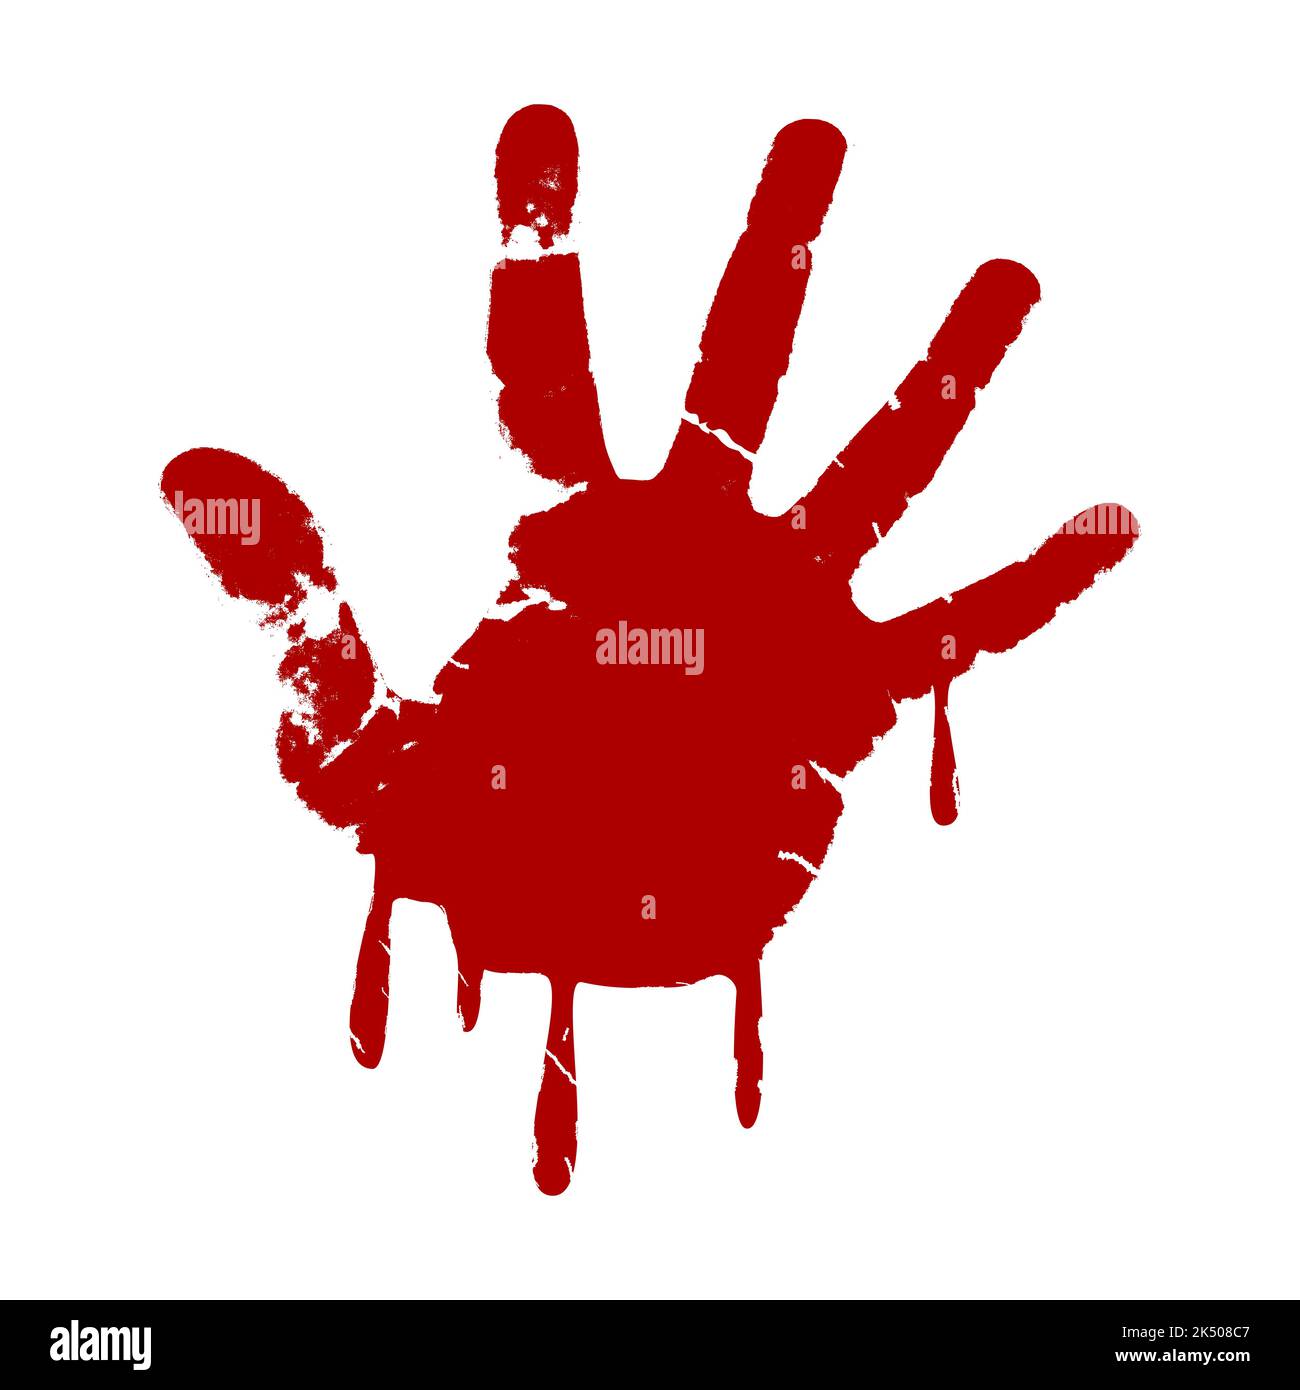 Bloody hand print with dripping blood. Red palm imprint with drops of blood. Scary Halloween concept. Victim of violence. Horror movie idea. Vector Stock Vector